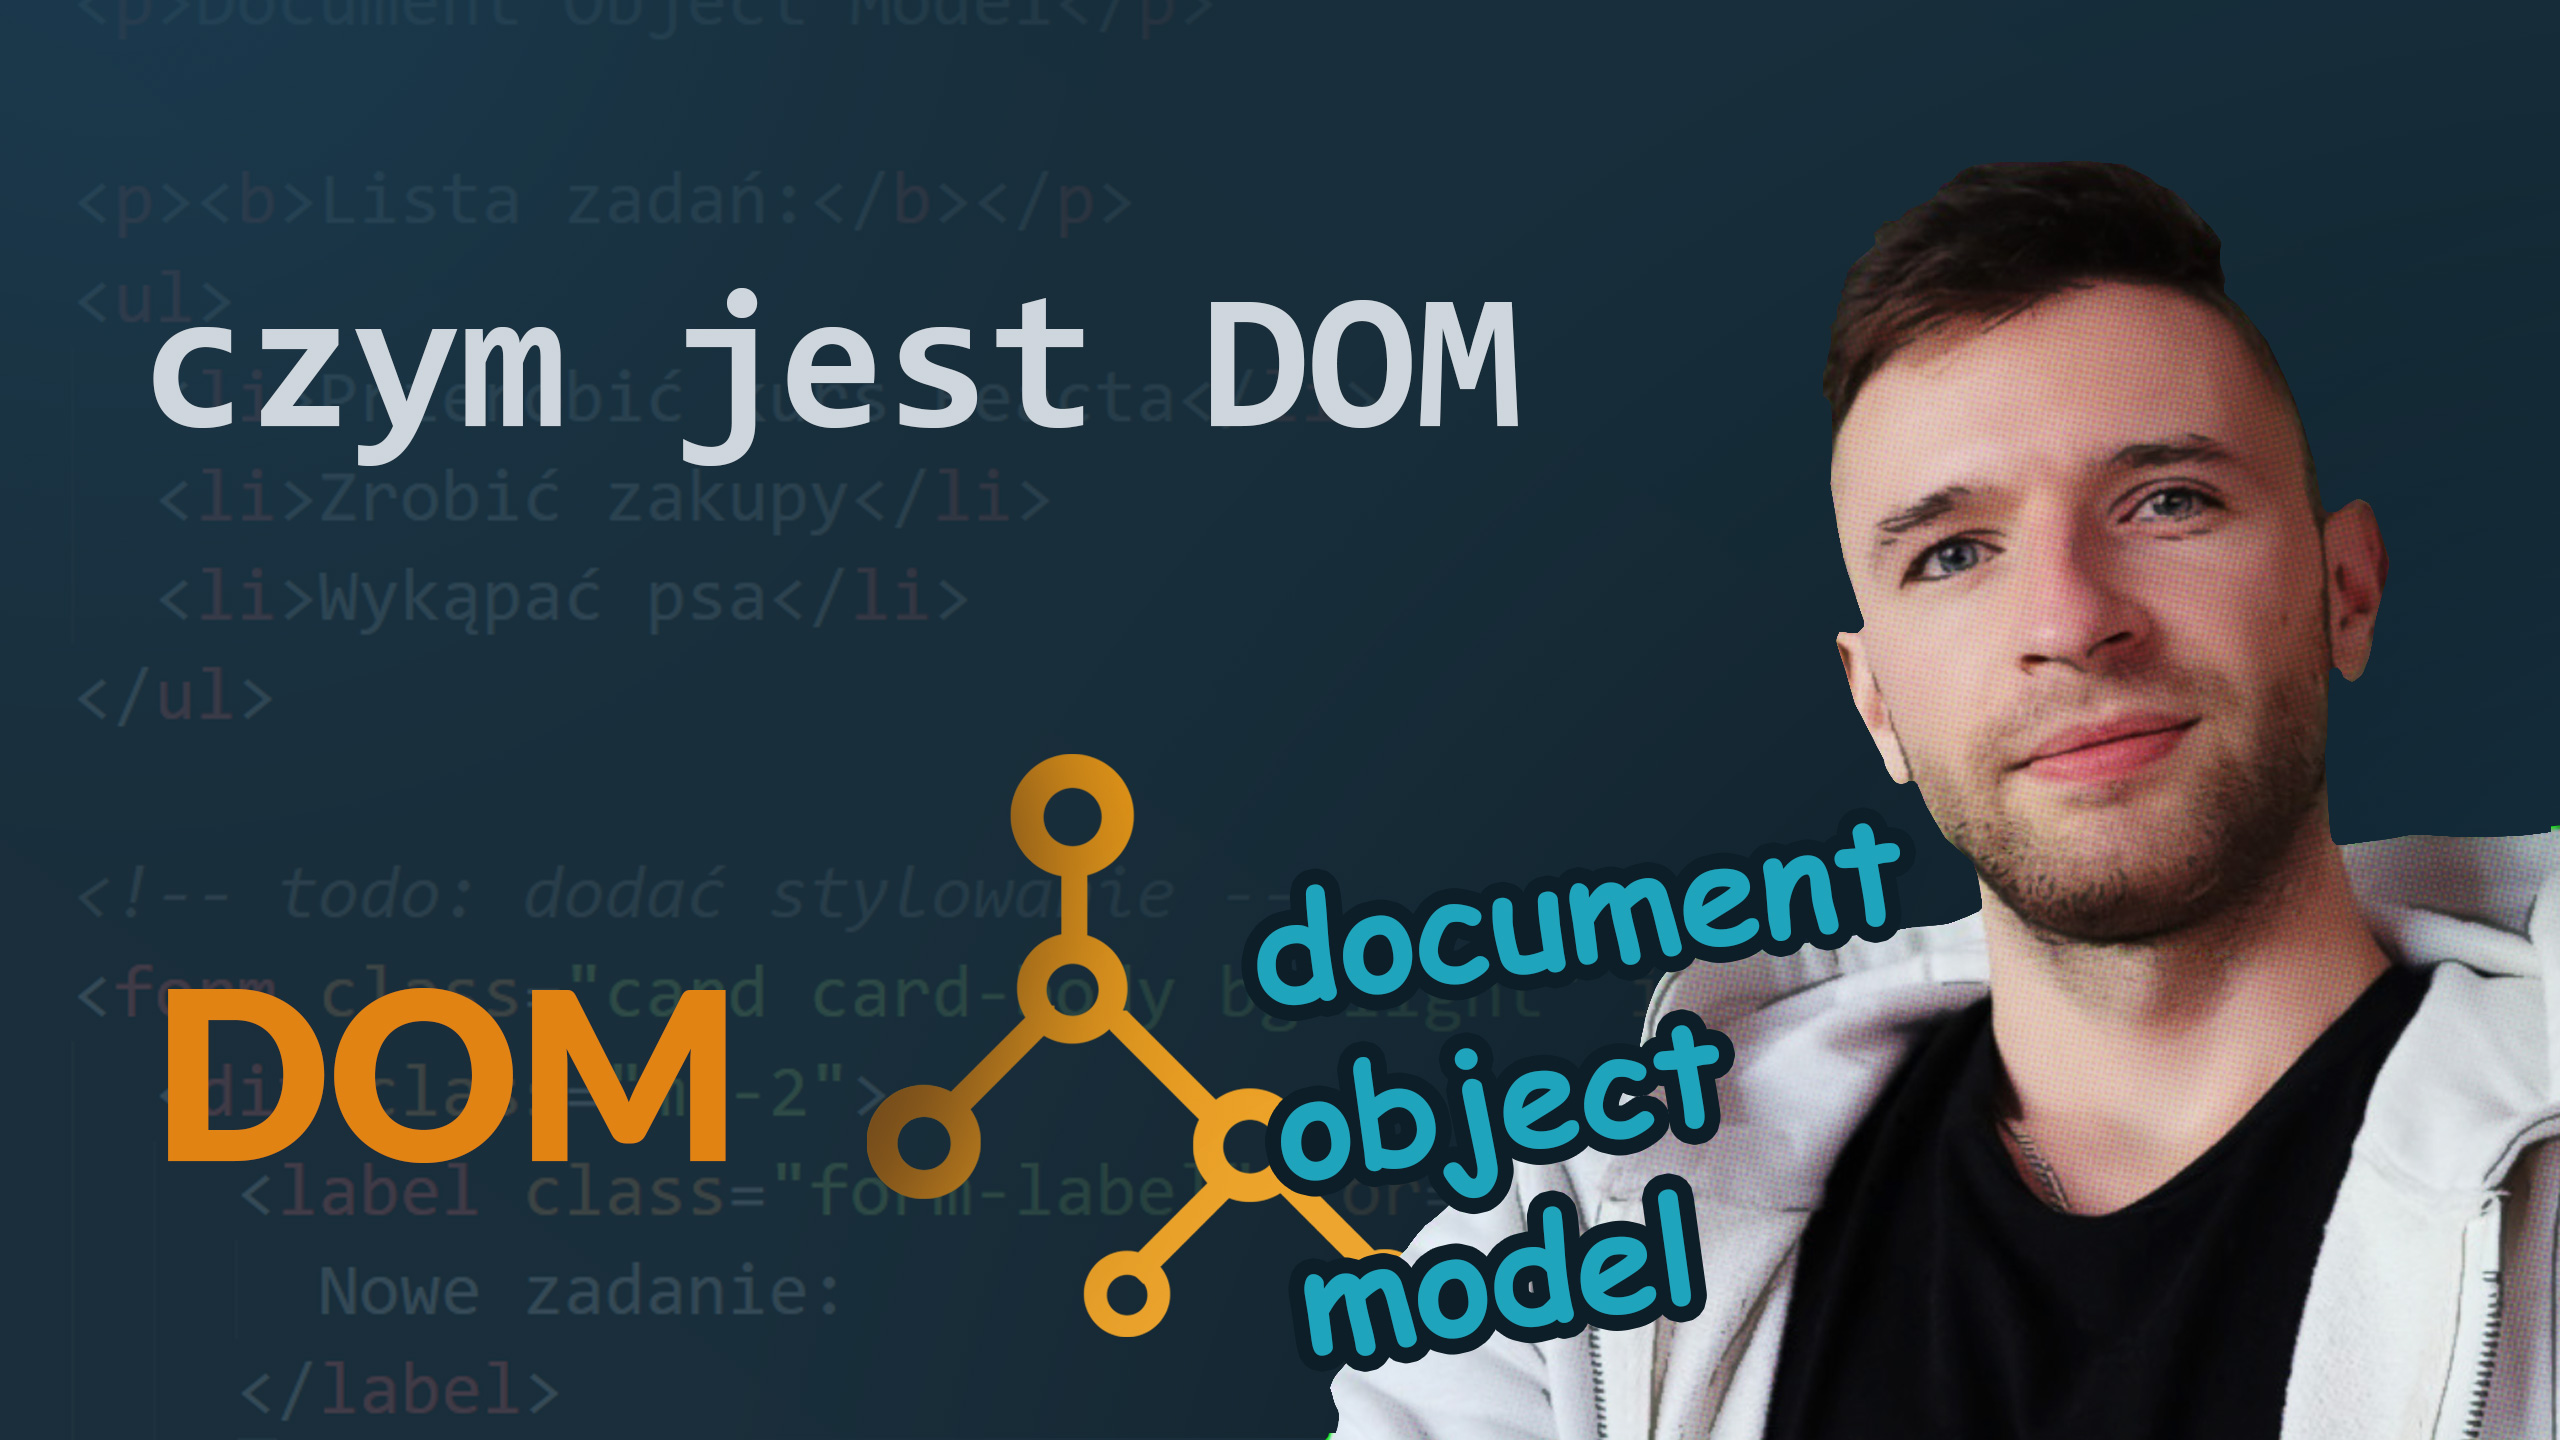 DOM - Document Object Model